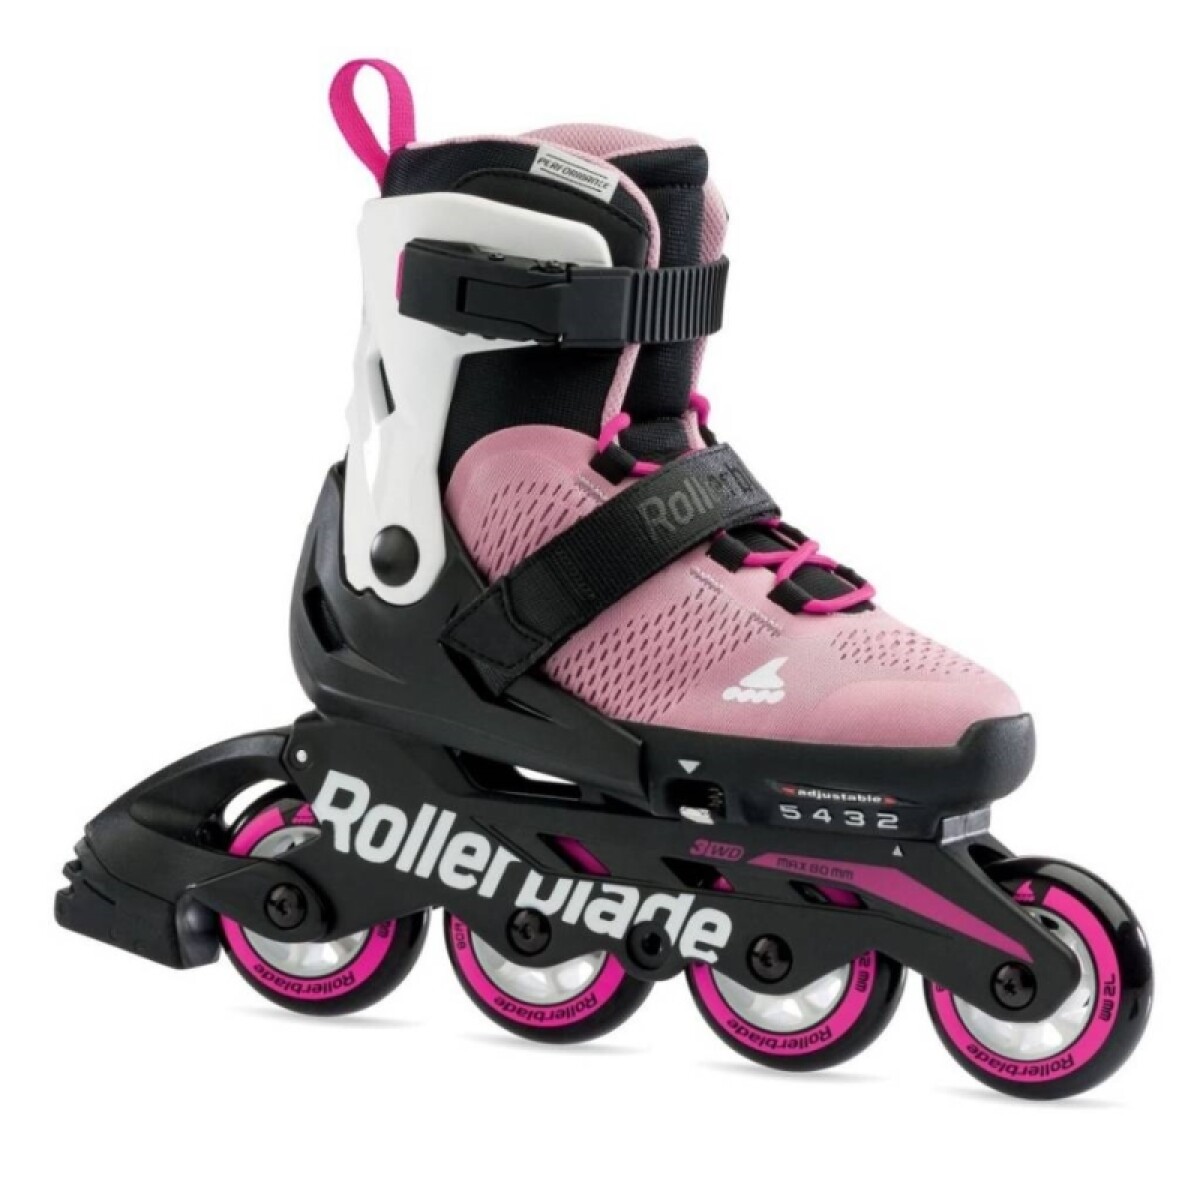 Roller Profesional Rollerblade Microblade Regulable Max.60kg - Rosa/blanco 